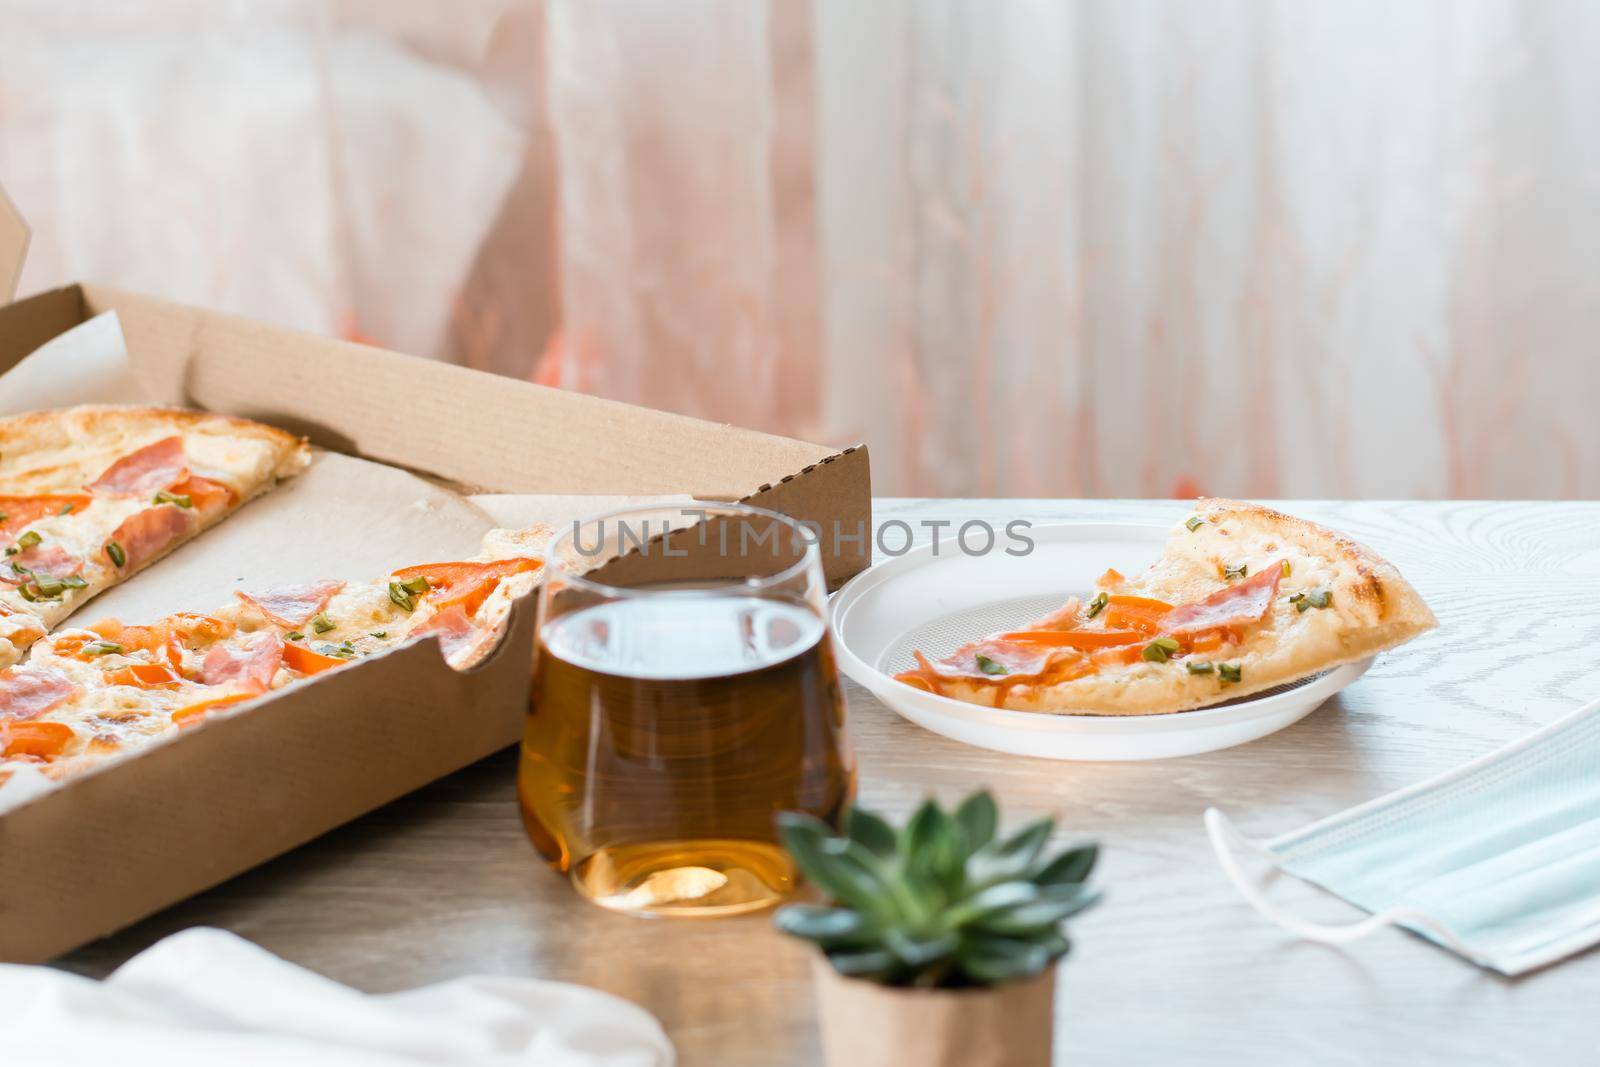 Takeout food. A slice of pizza in a disposable plastic plate and a box of pizza on the table in the kitchen.